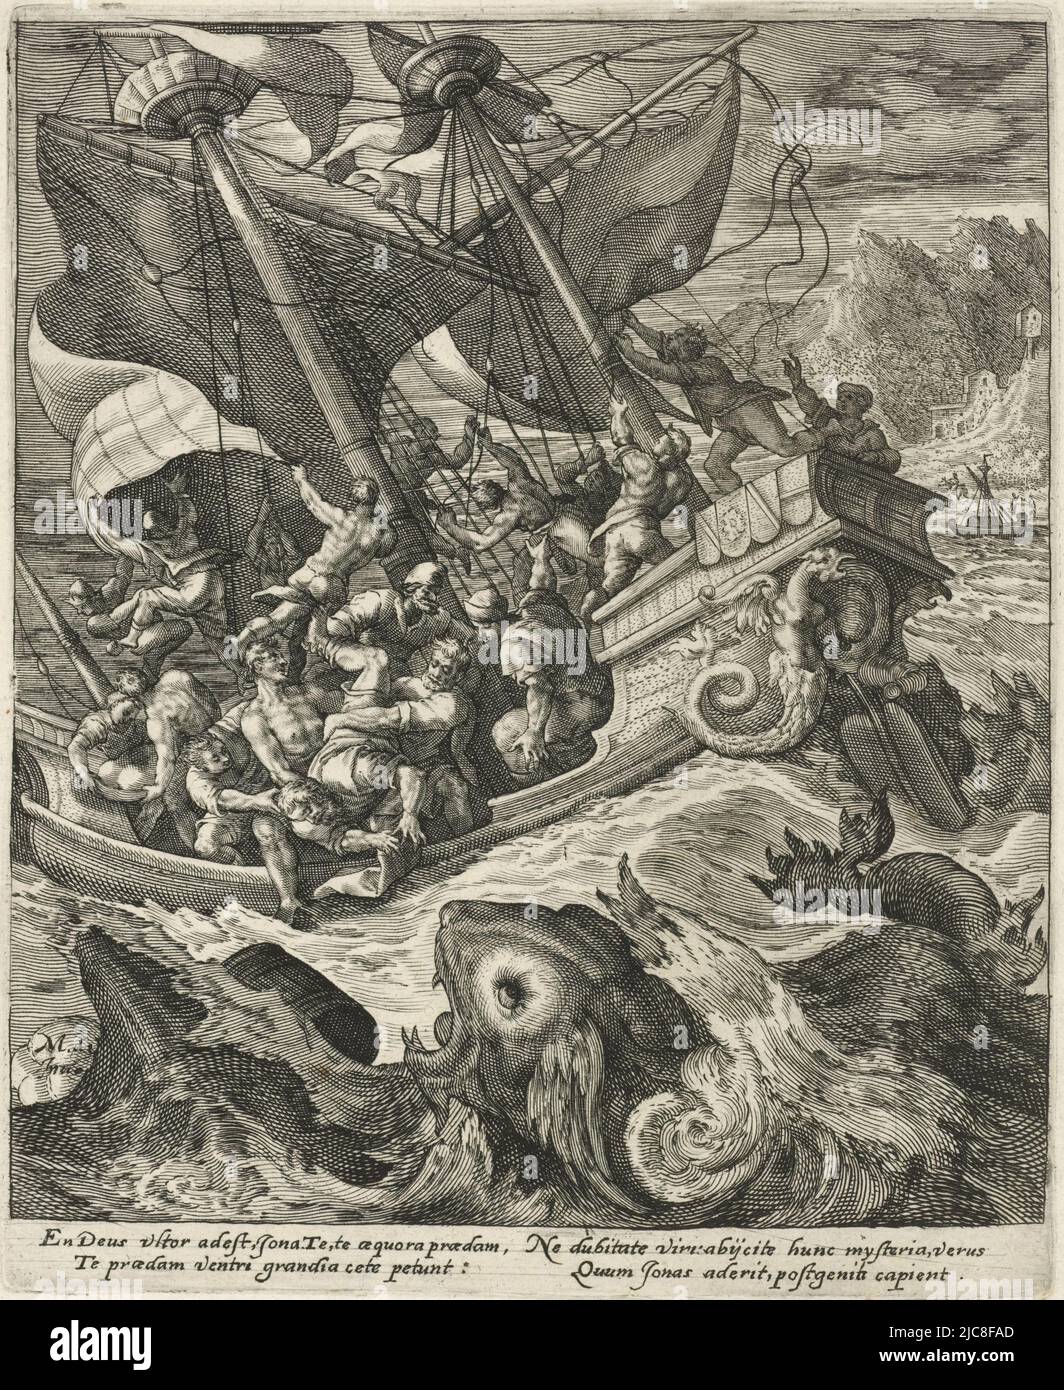 The ship on which Jonah is sailing is ravaged by a severe storm. Jonah asks the sailors to throw him overboard to appease God's anger. A large fish swims in front of the ship. In the margin a two-line caption in Latin. Jonah is thrown overboard by the sailors History of Jonah , print maker: Crispijn van de Passe (I), Maerten de Vos, (mentioned on object), Antwerp, 1574 - 1637, paper, engraving, h 217 mm × w 178 mm Stock Photo